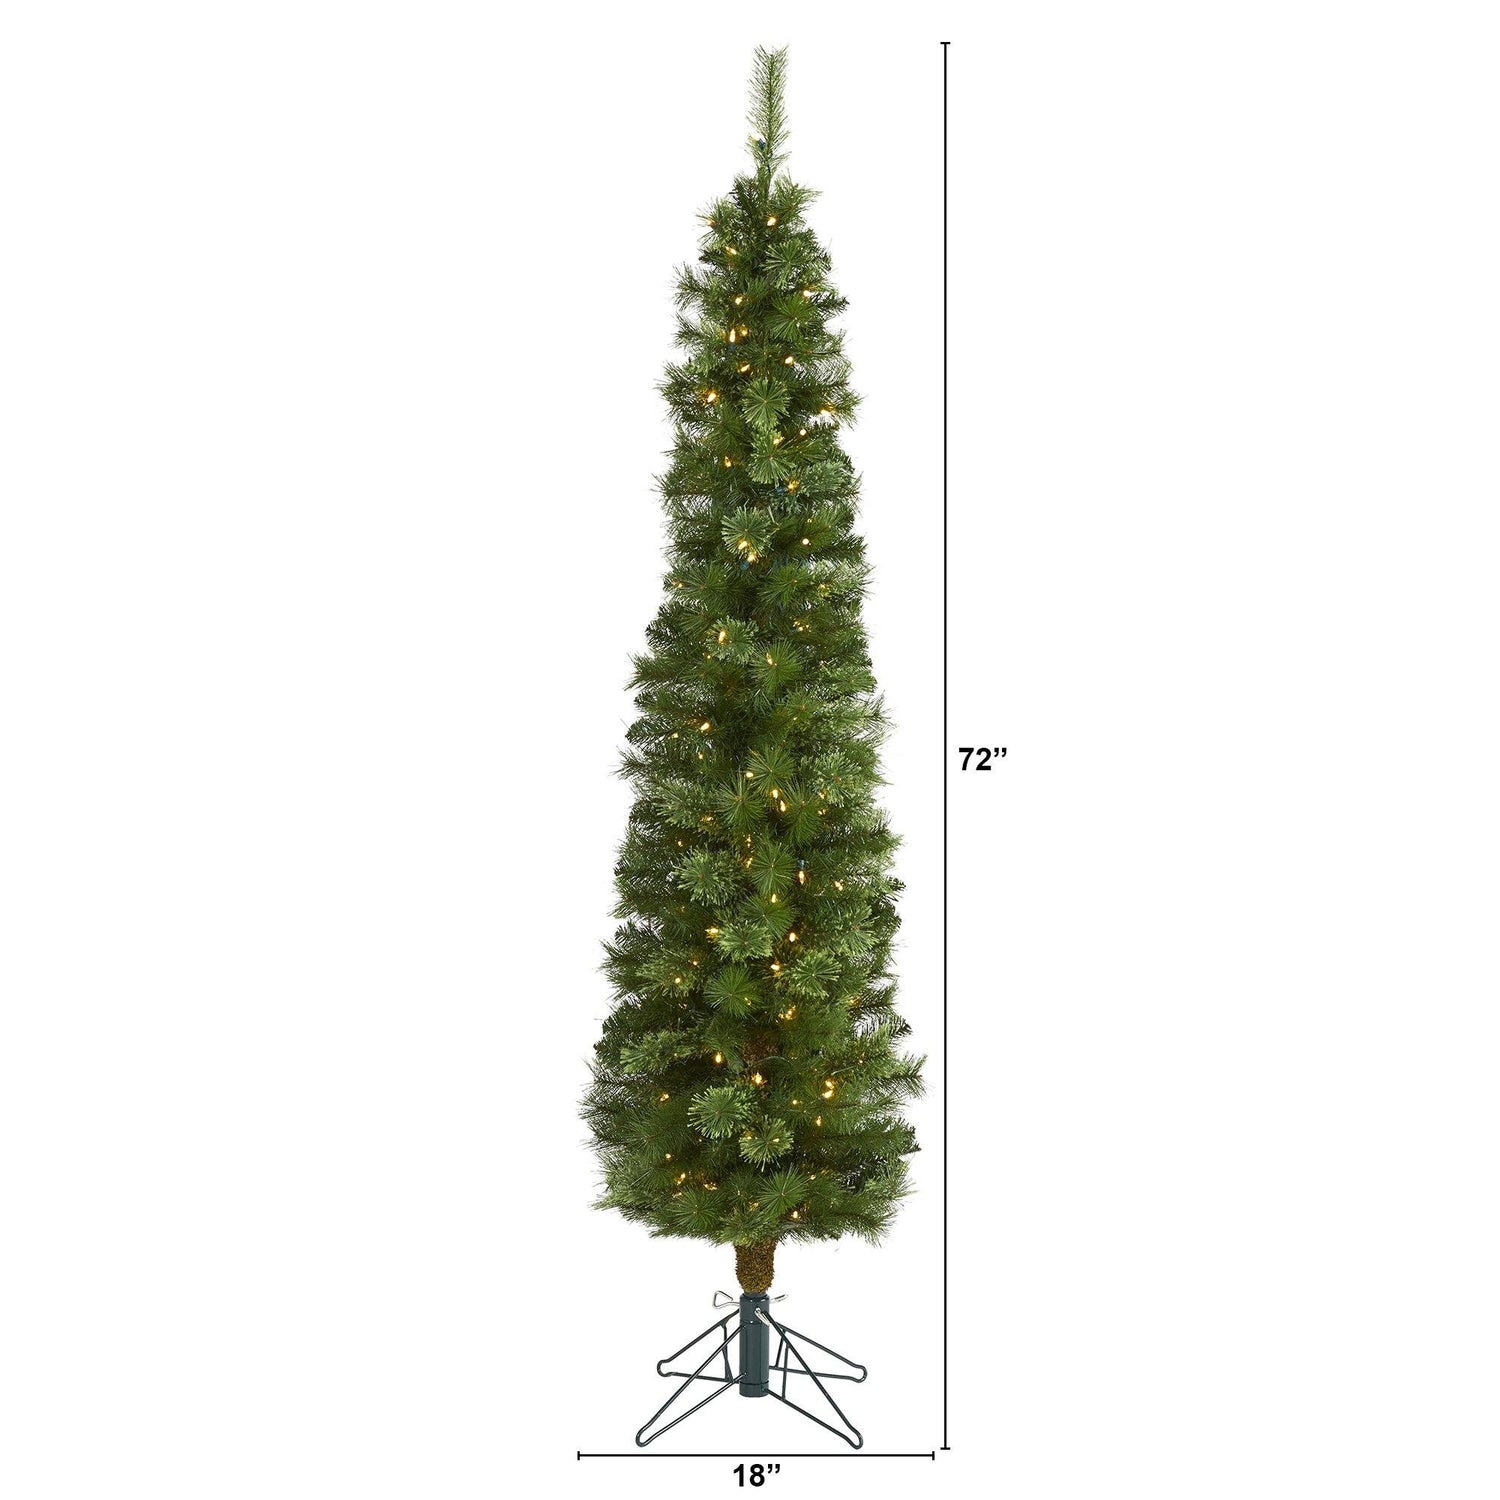 6' Green Pencil Artificial Christmas Tree with 150 Clear (Multifunction) LED Lights and 264 Bendable Branches